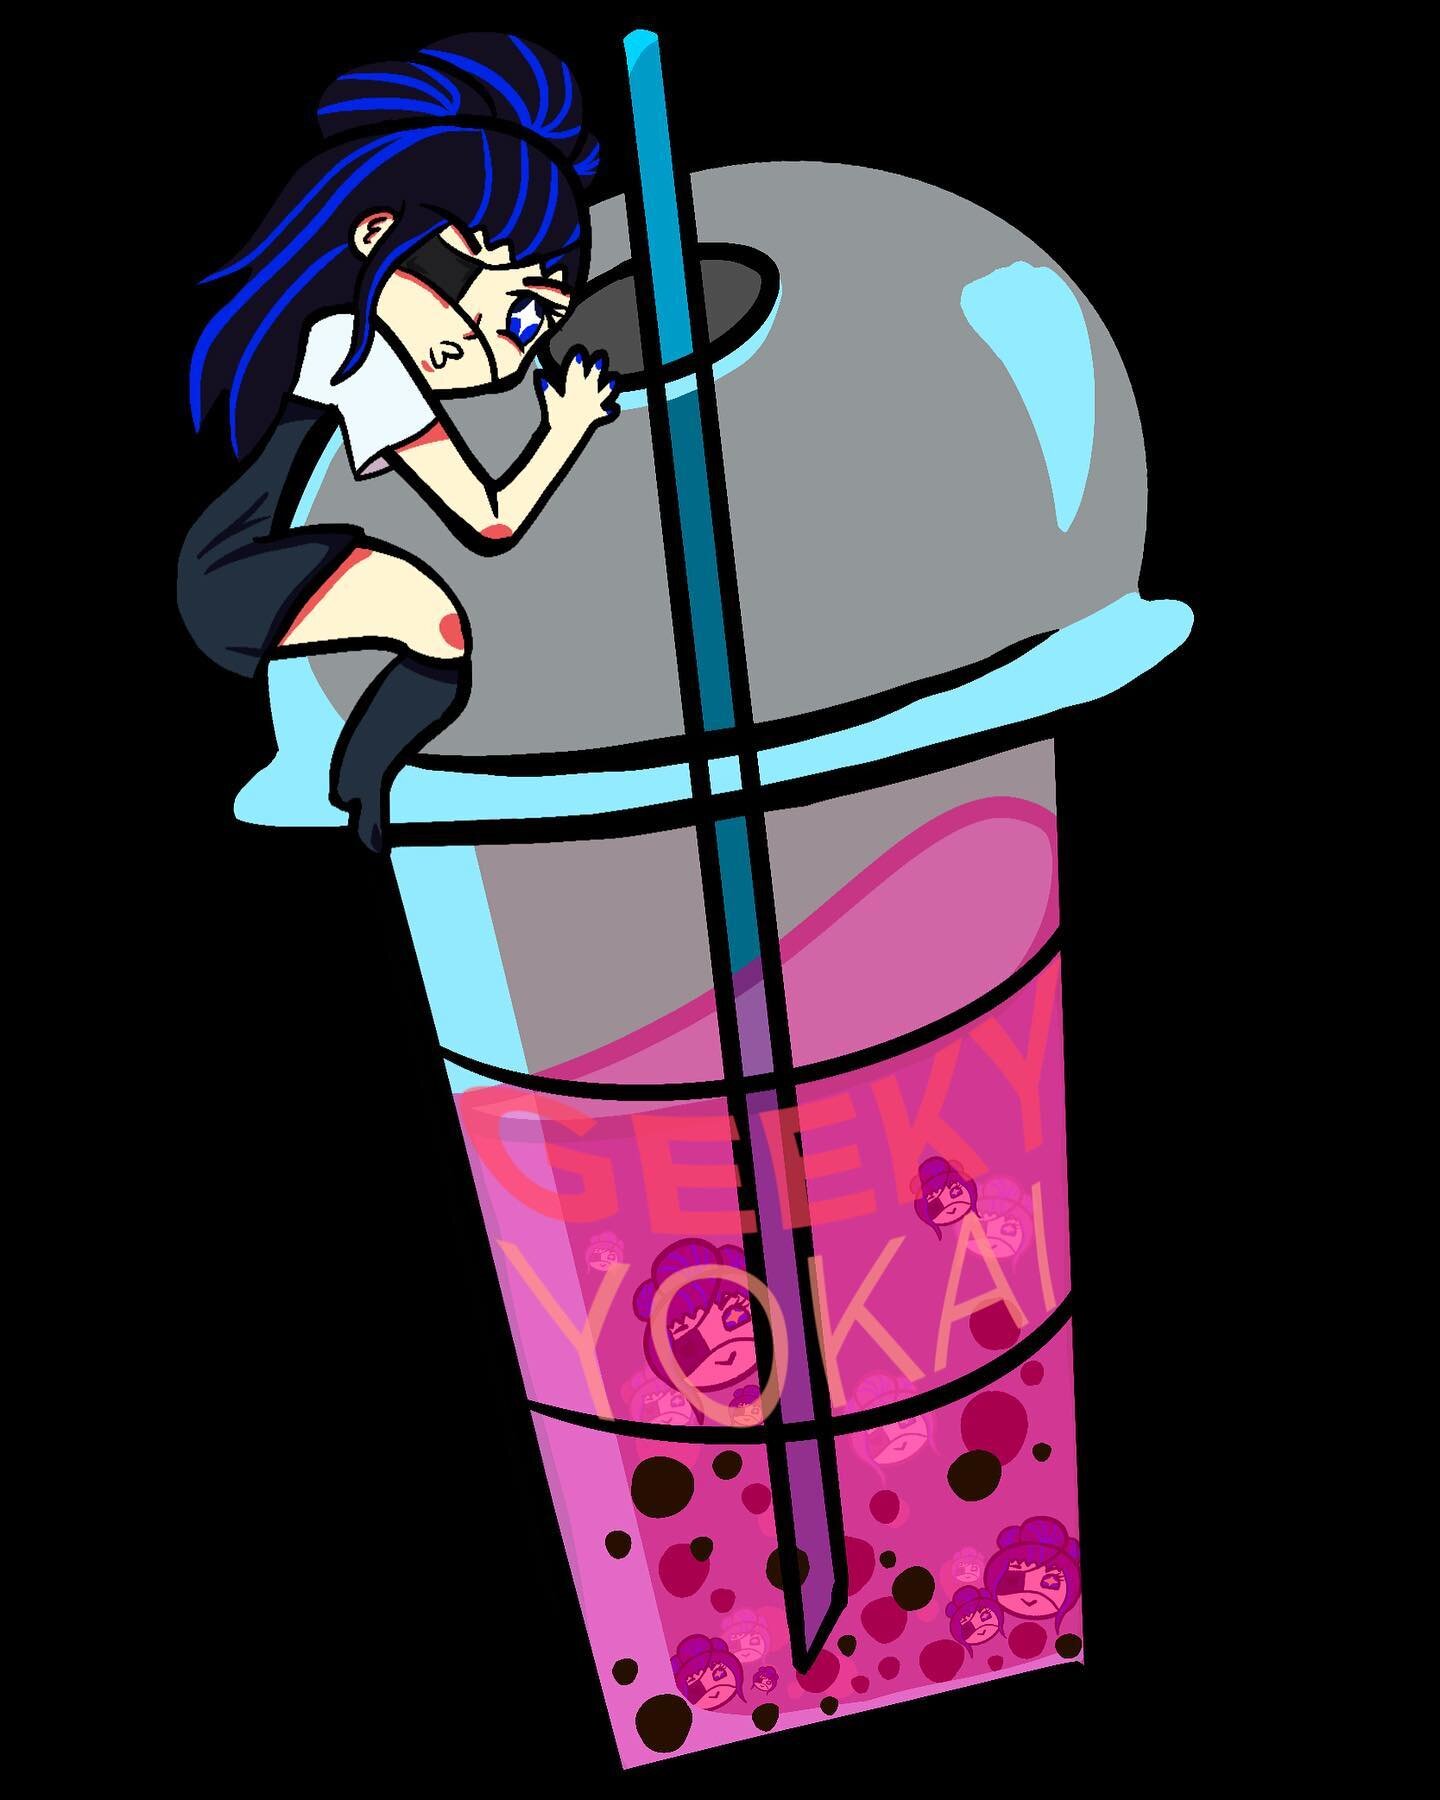 Can you guess Promis&rsquo;s favorite drink? You&rsquo;d be surprised but she&rsquo;s a bit of a Starbucks girl (although her hydration station cup is obviously black and bedazzled!)